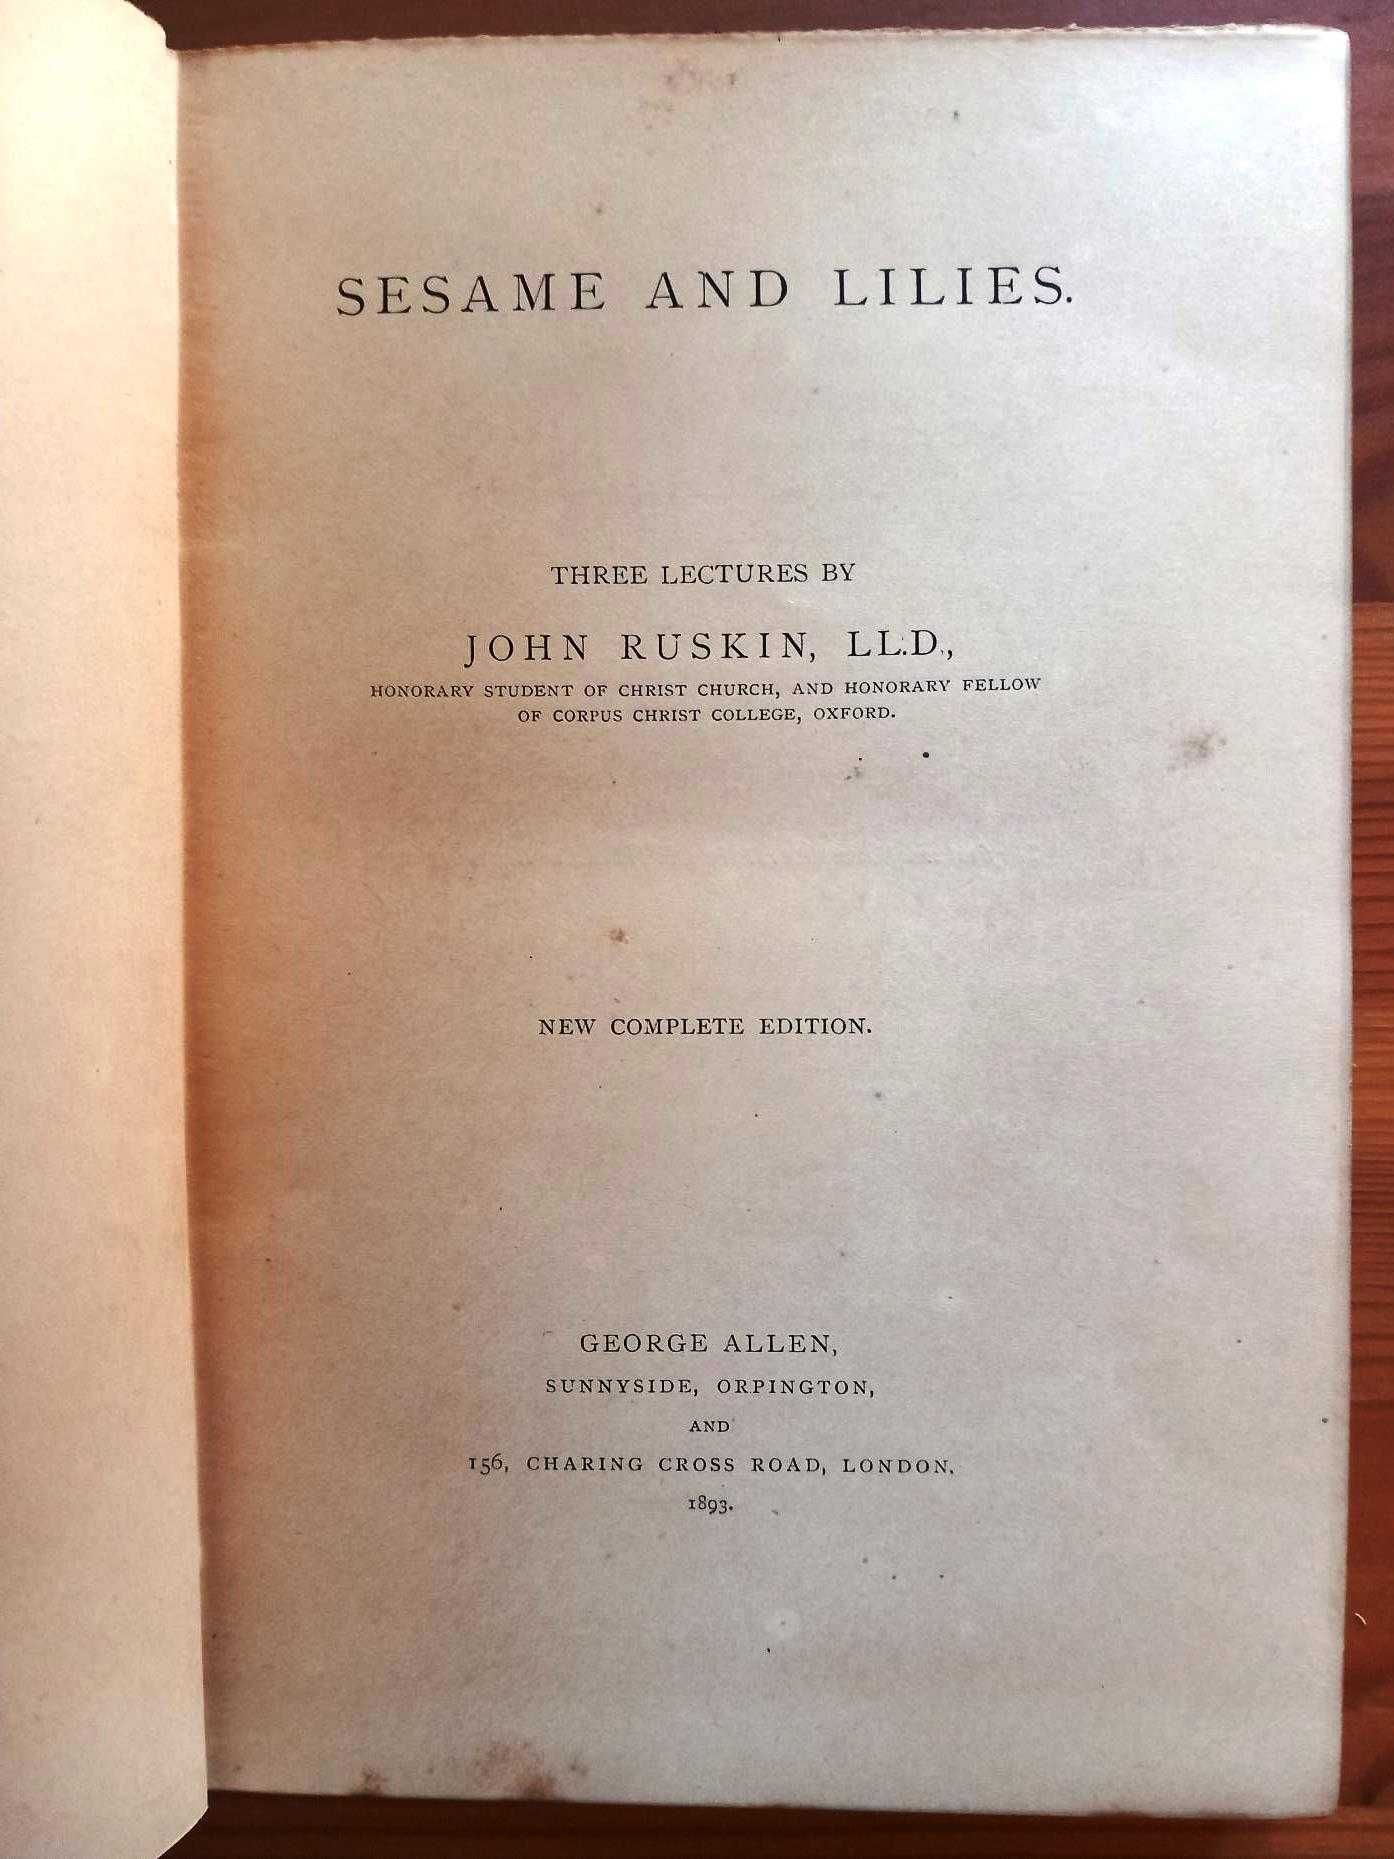 John Ruskin, Sesame and Lilies. Three Lectures